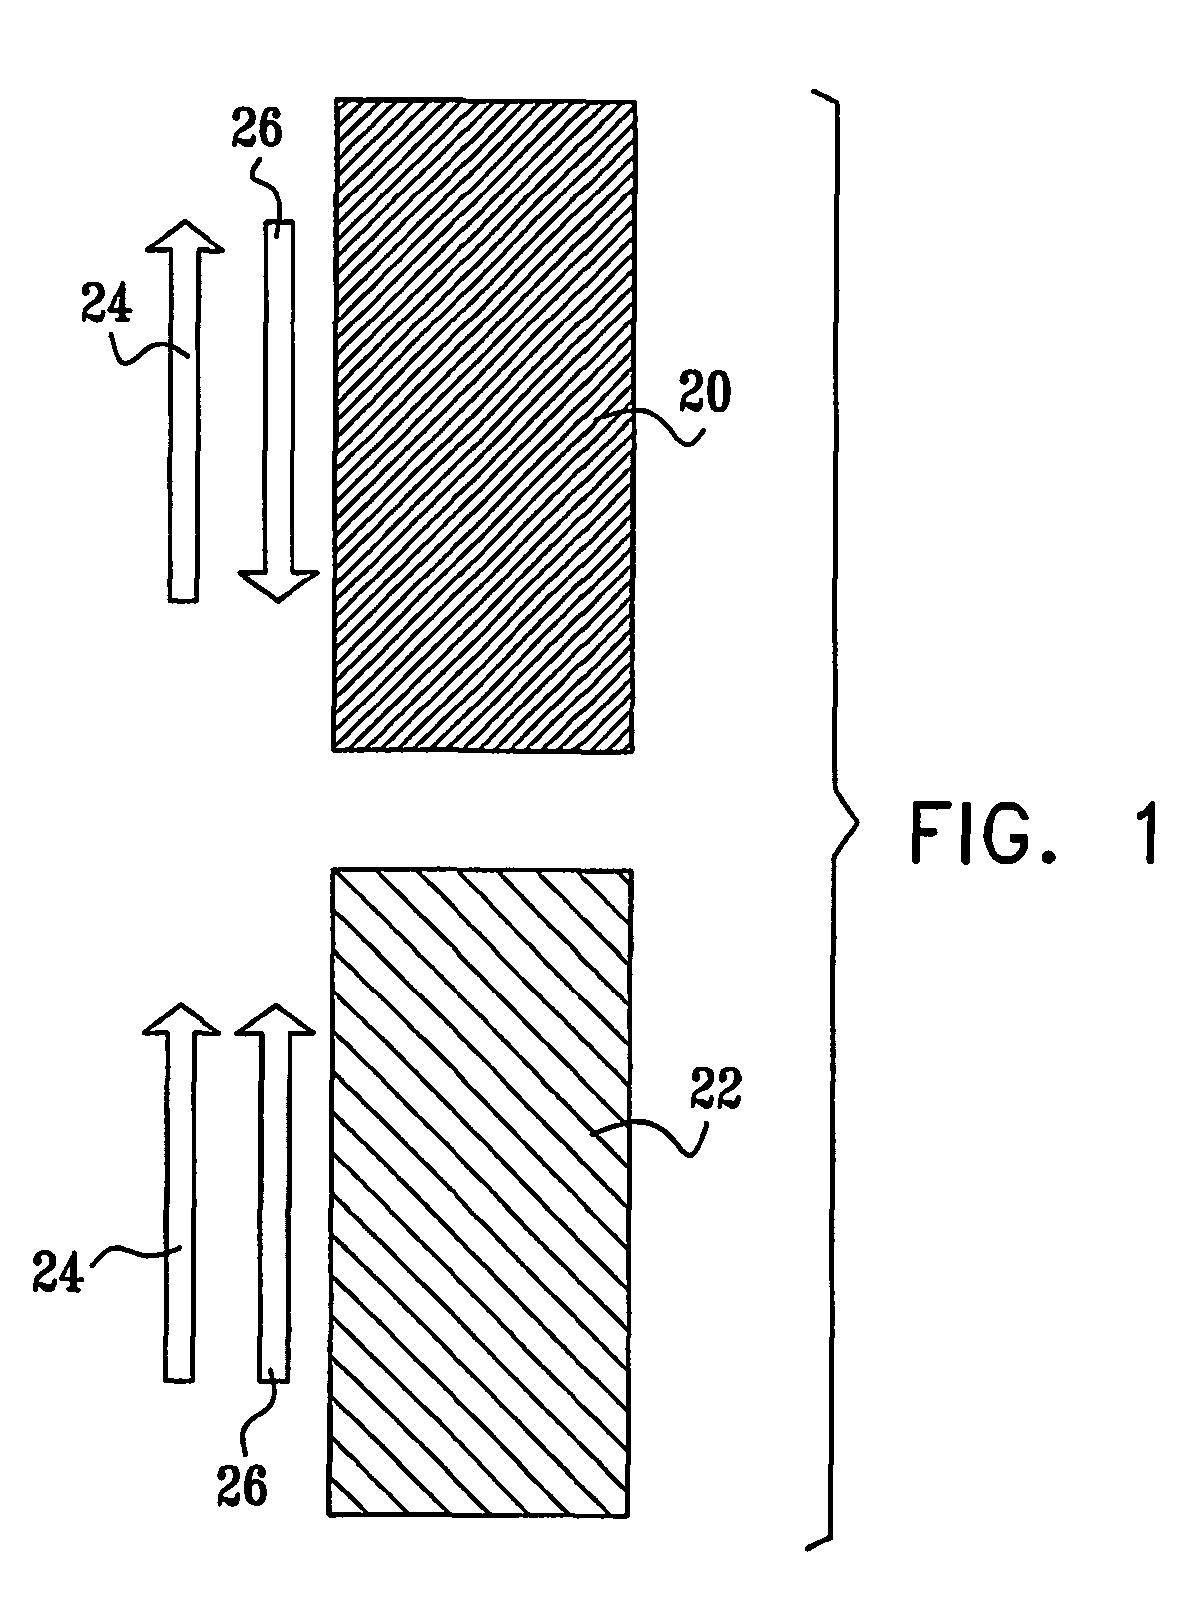 Antenna with virtual magnetic wall